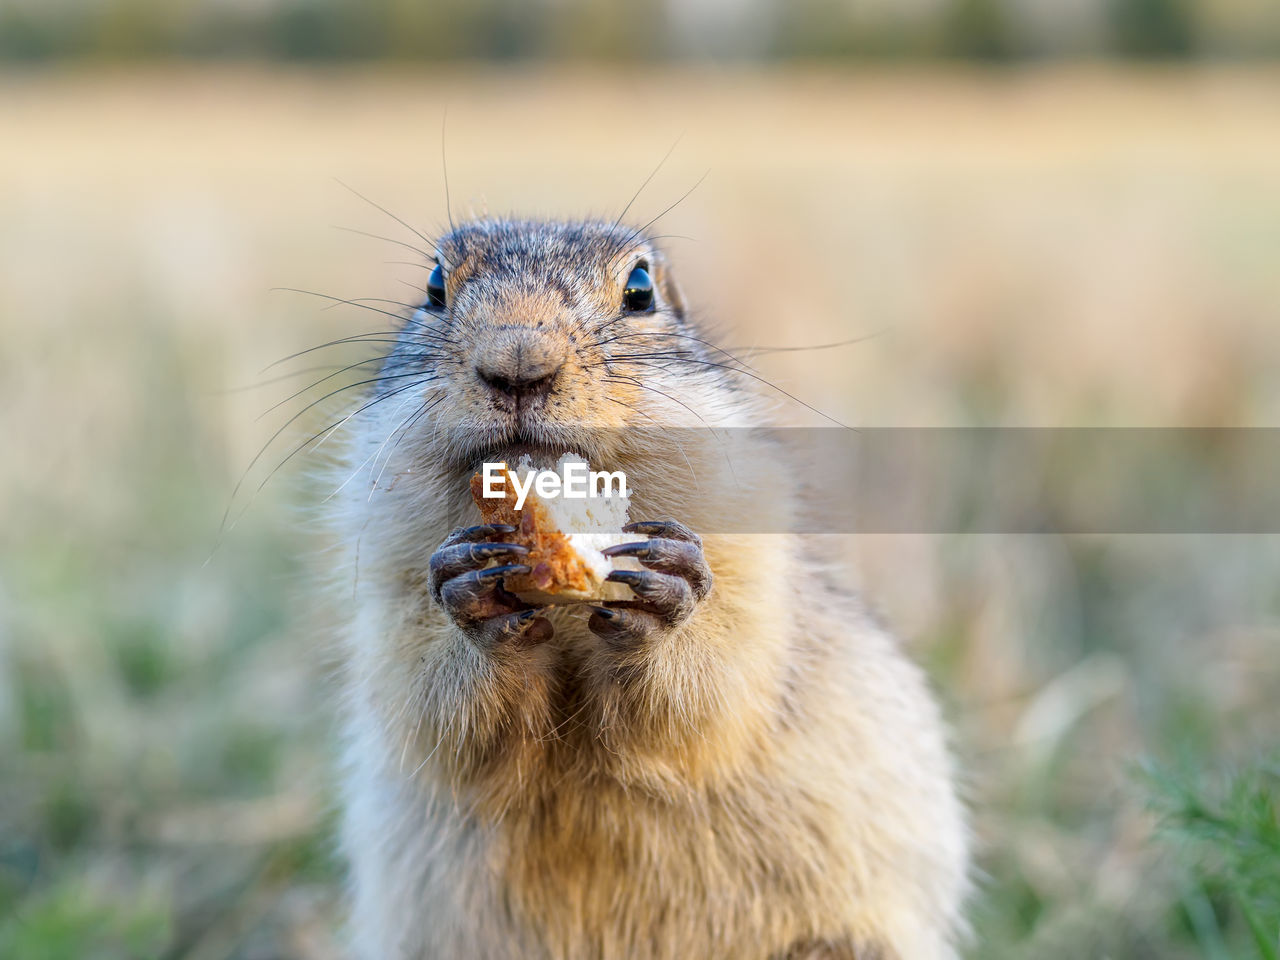 animal, animal themes, animal wildlife, one animal, mammal, wildlife, squirrel, whiskers, portrait, eating, rodent, prairie dog, no people, nature, close-up, animal body part, food, focus on foreground, looking at camera, food and drink, outdoors, cute, animal hair, day, front view